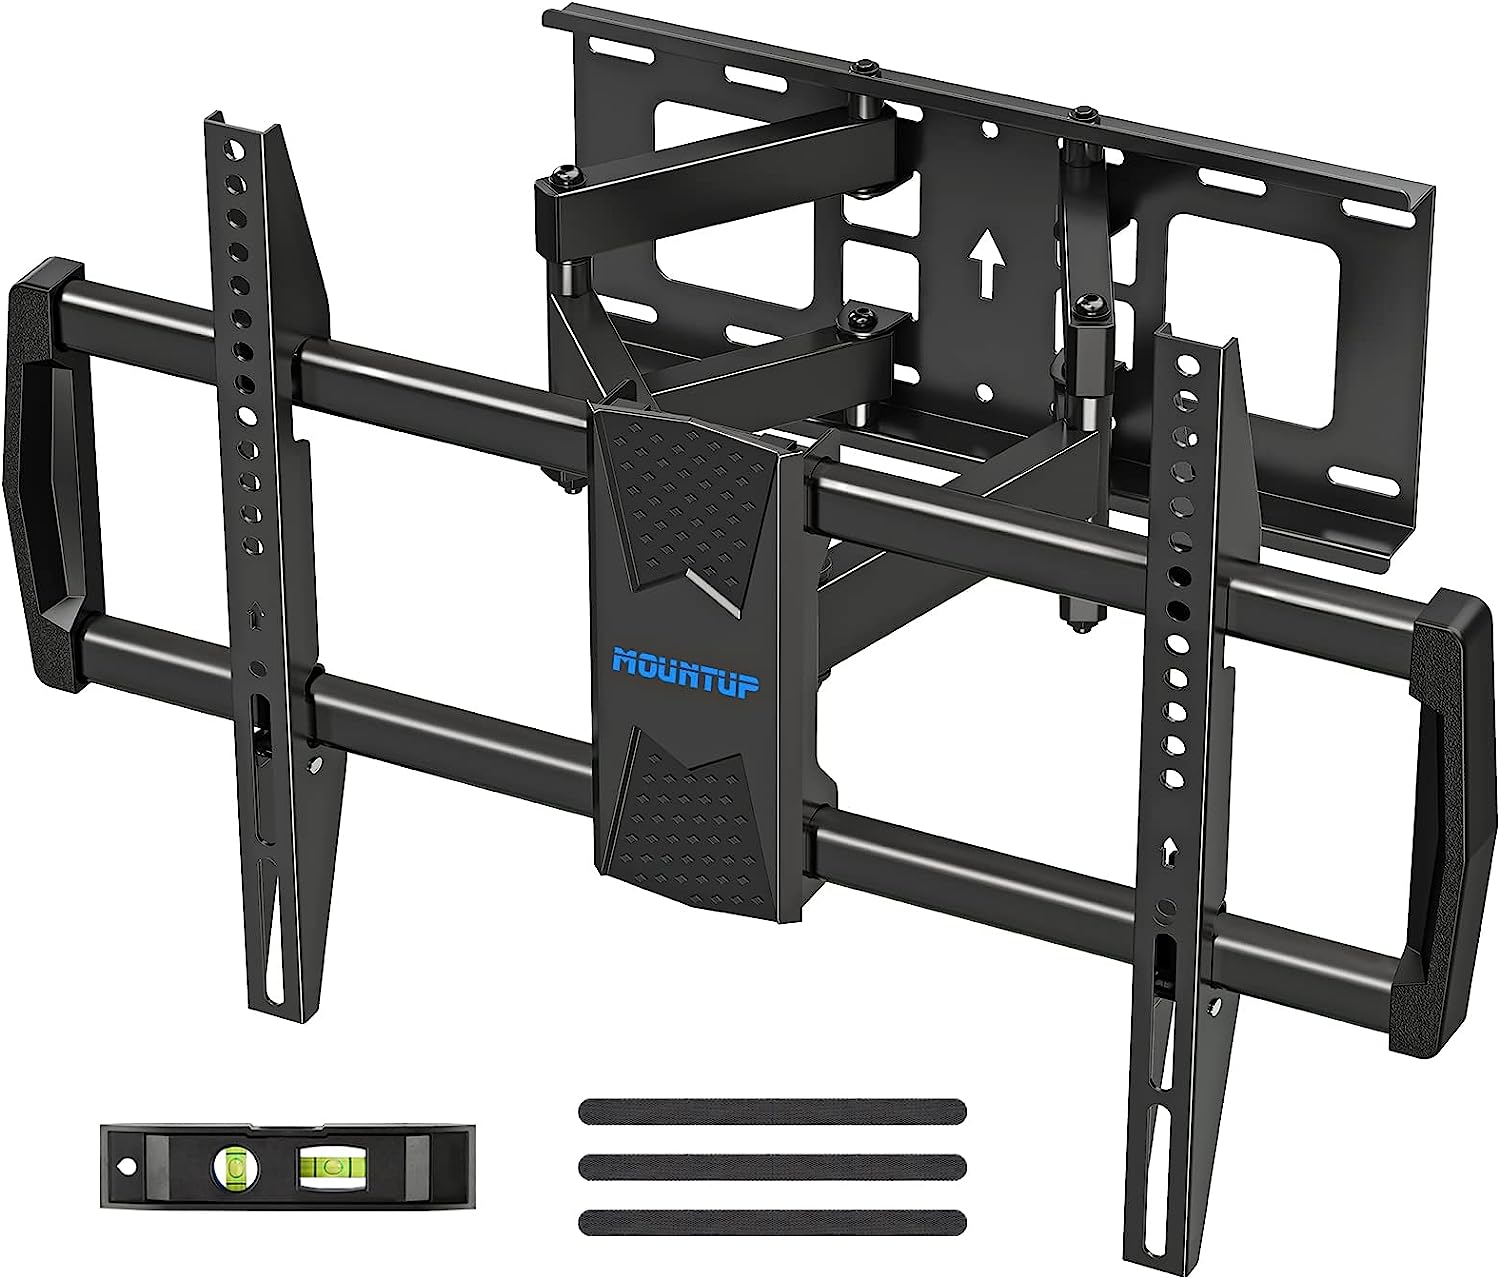 Prime Members: MOUNTUP Full-Motion Swivel & Tilt TV Wall Mount (for 42"-82" TVs, up to 100lbs) $24.81 + Free Shipping